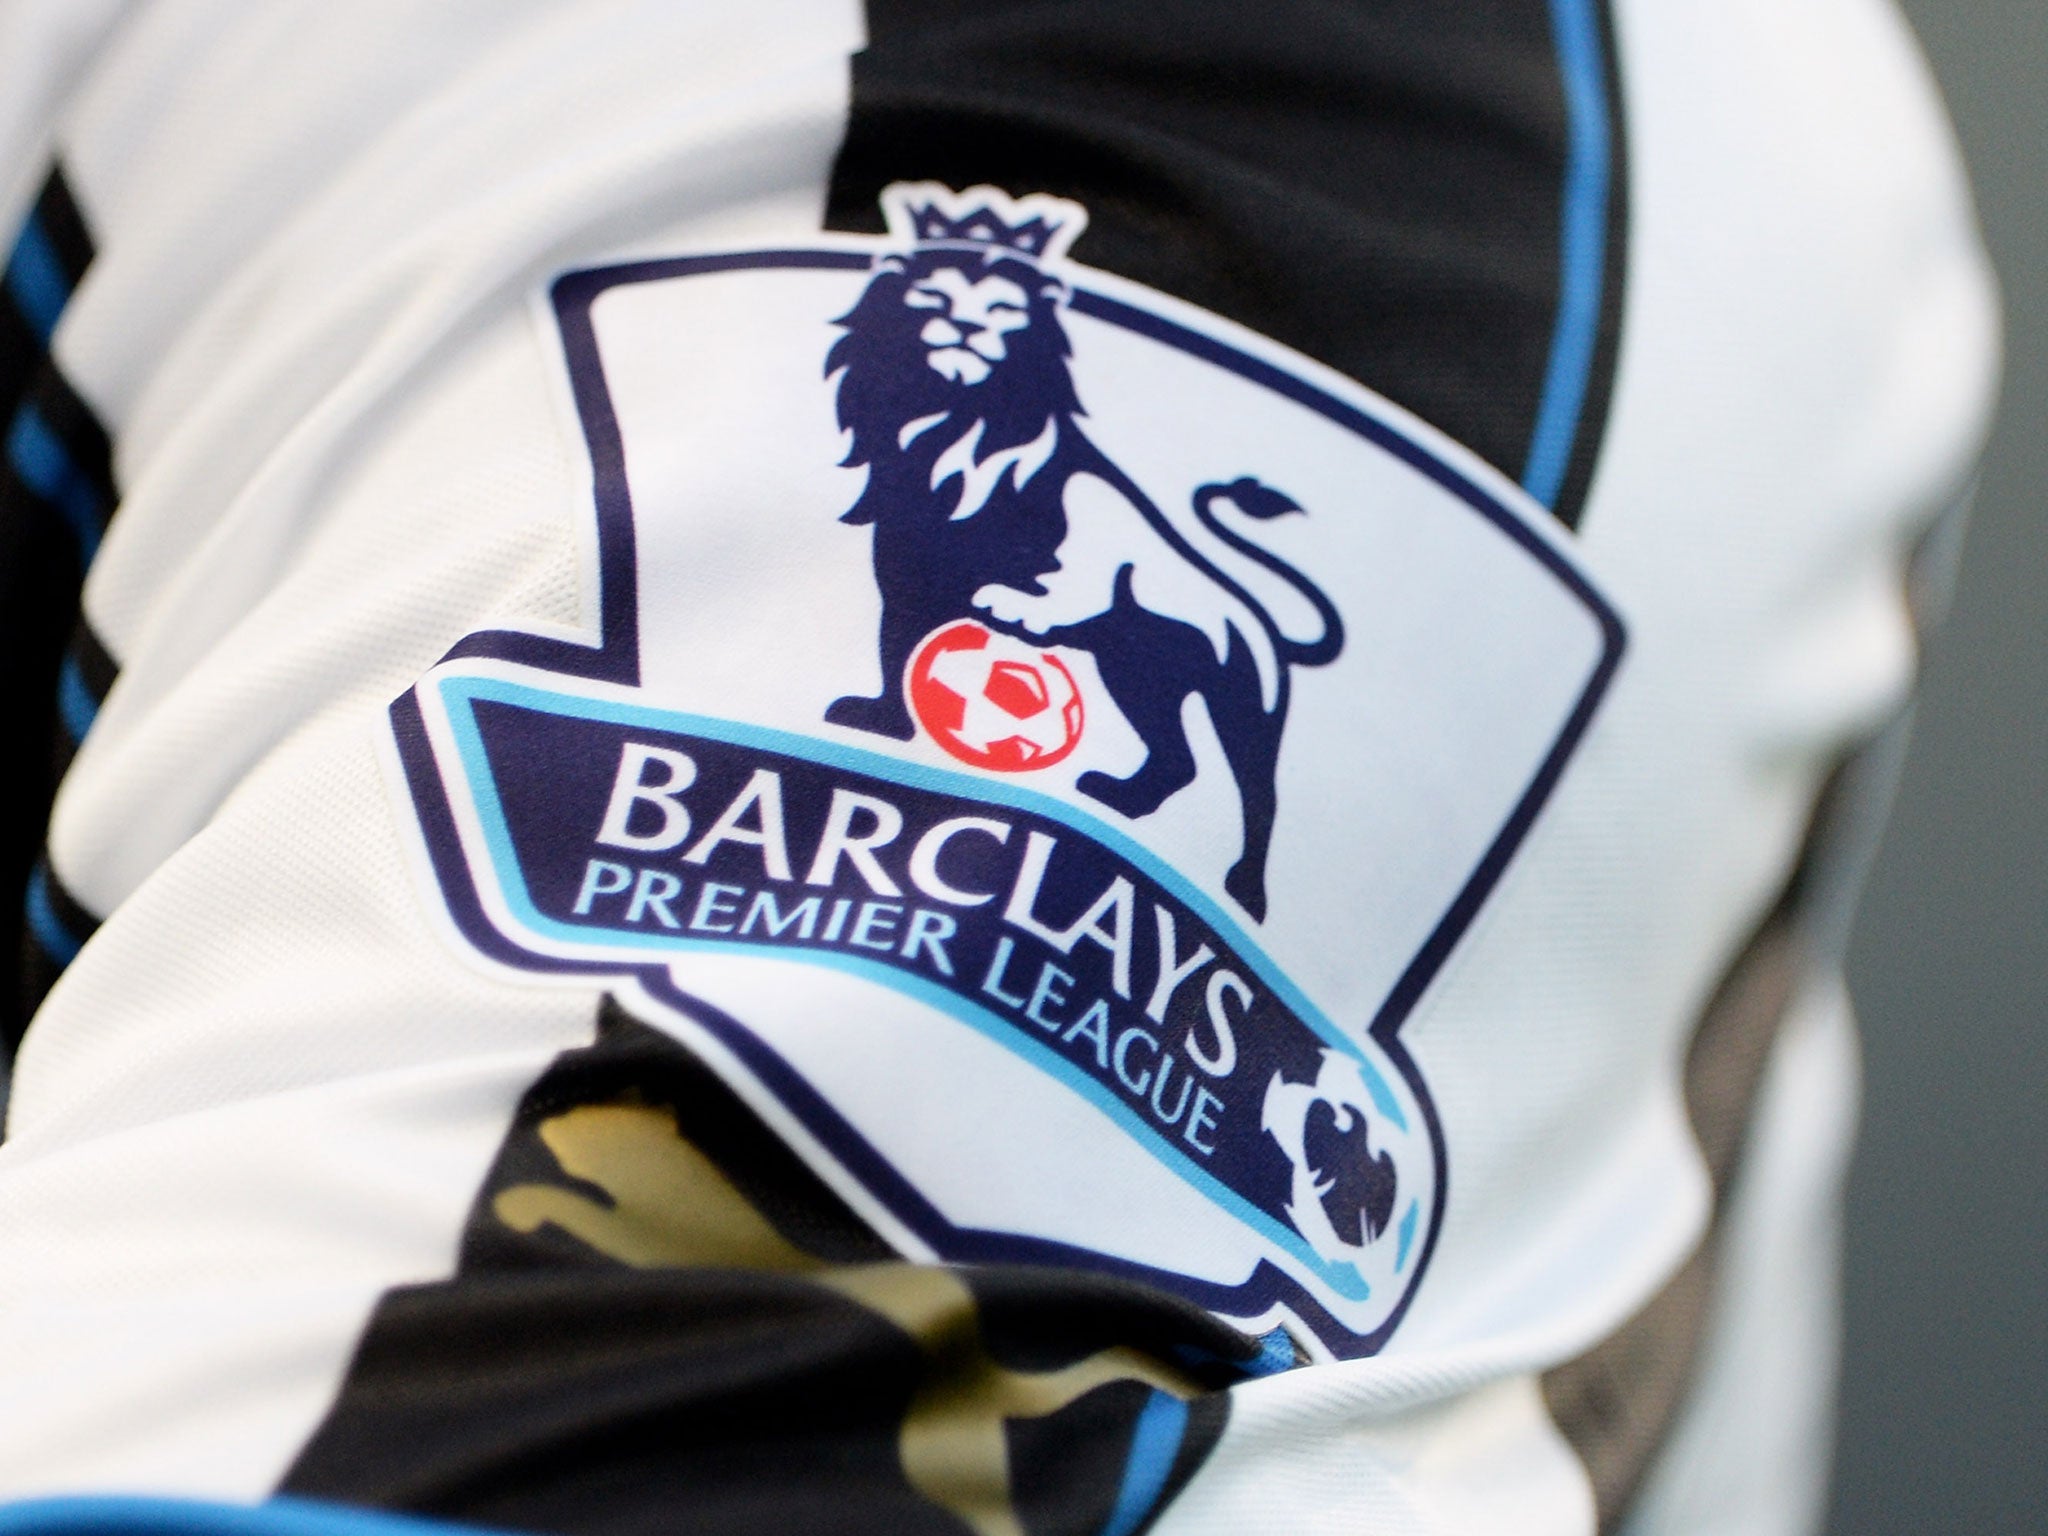 The lion will be removed from the Premier League logo